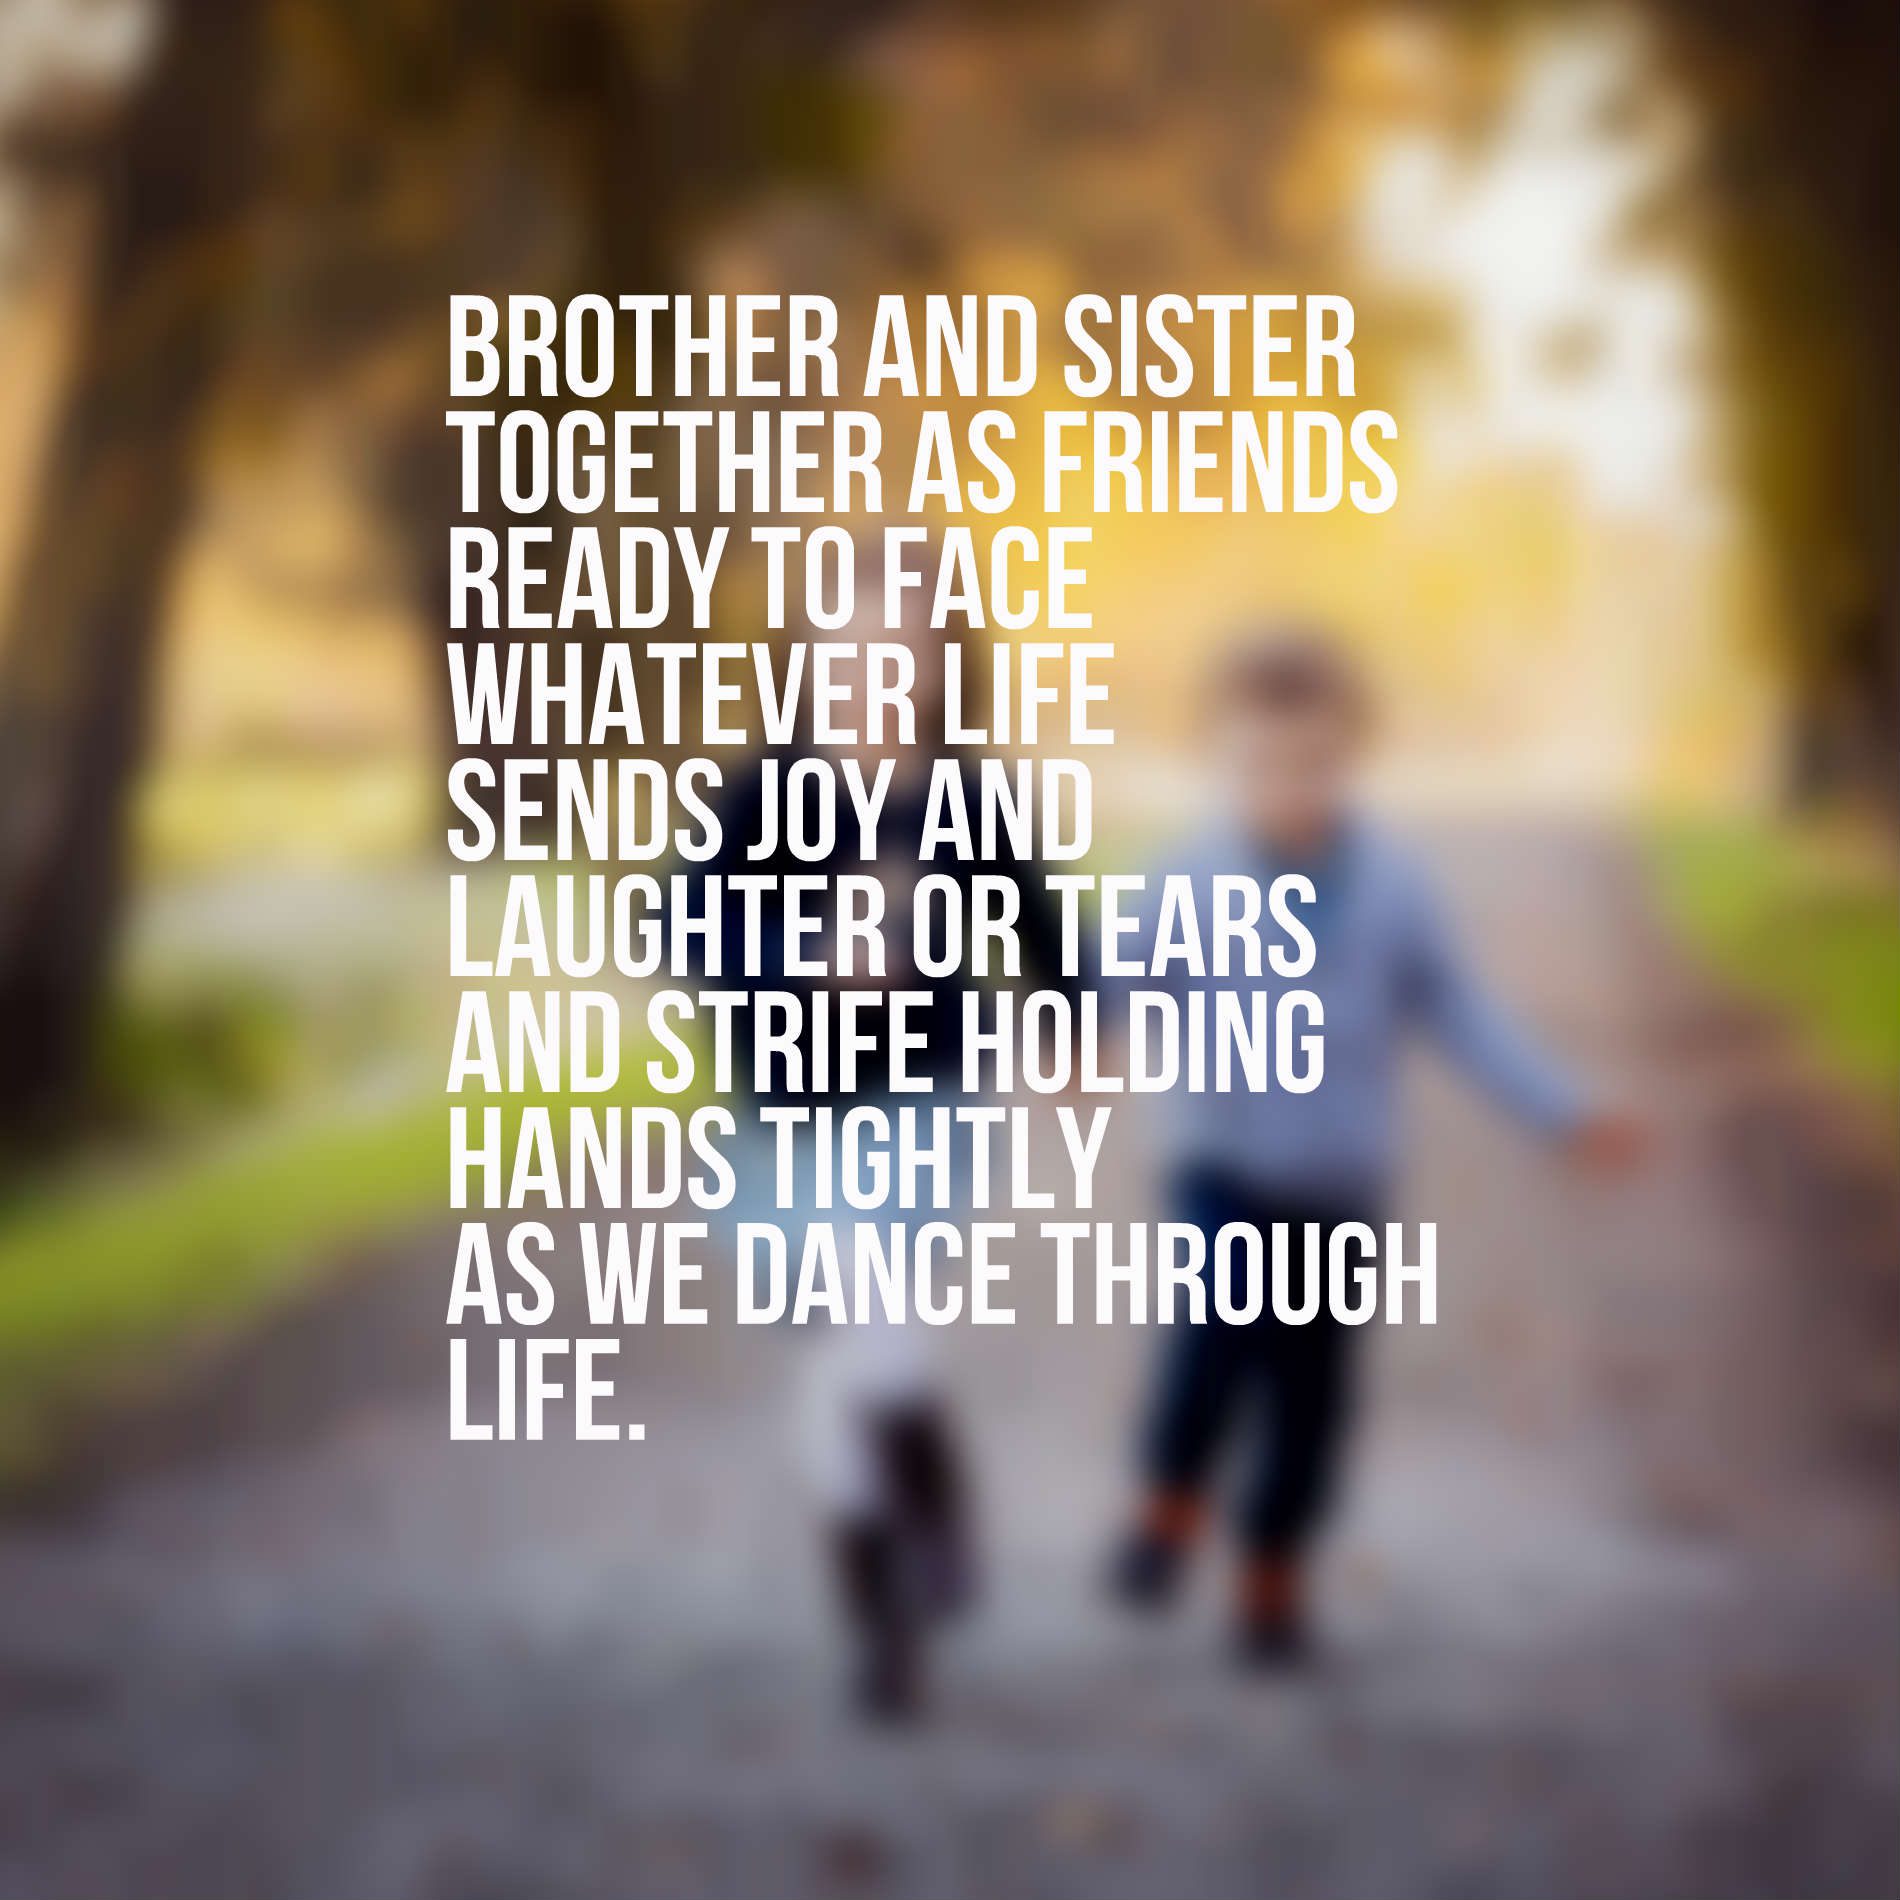 Brother and sister together as friends ready to face whatever life sends Joy and laughter or tears and strife holding hands tightly as we dance through life.